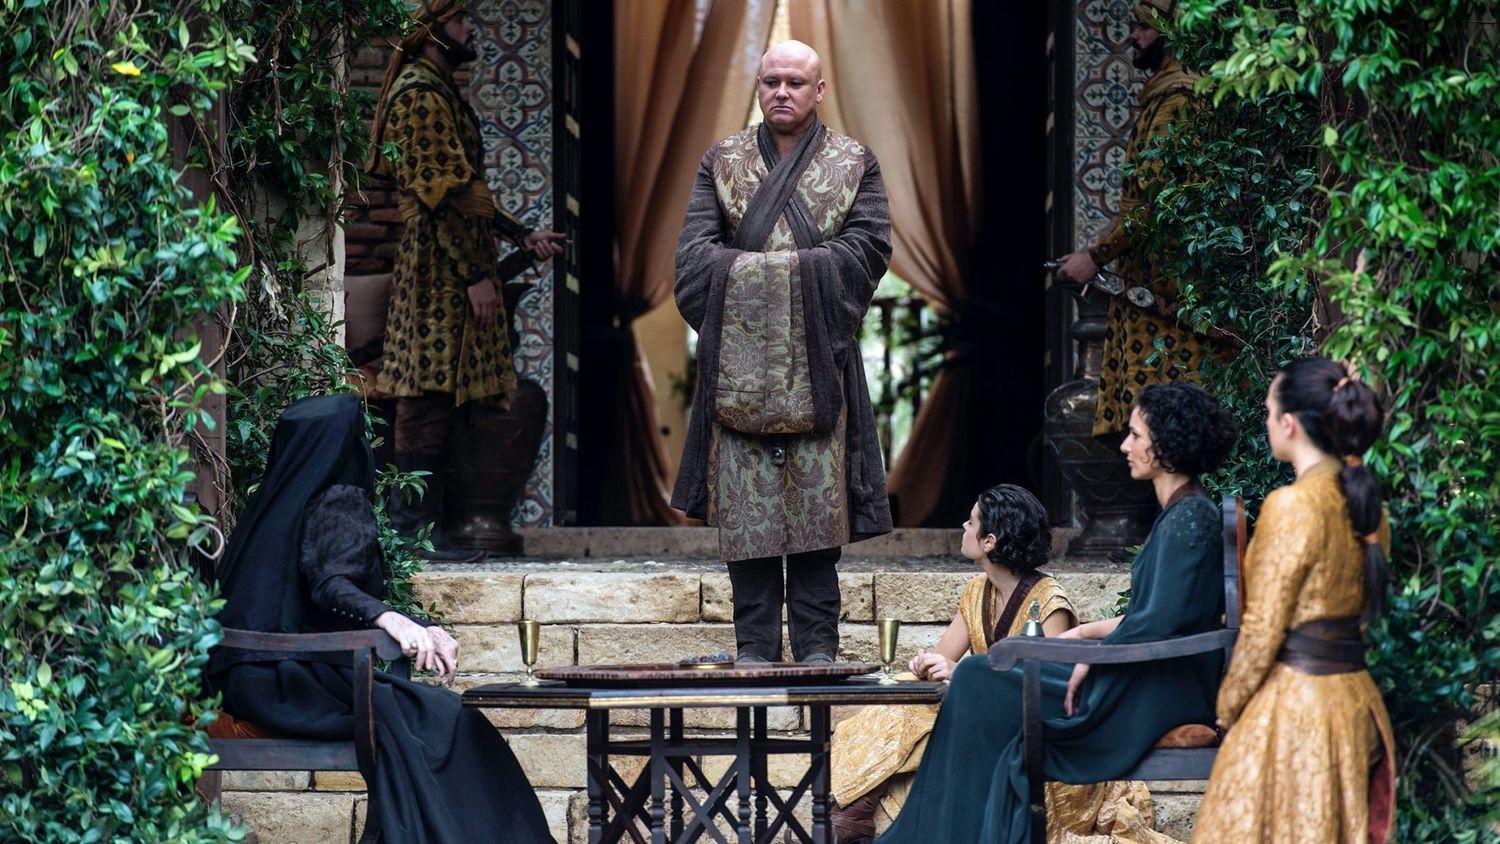 Varys forges a Tyrell-Dornish alliance under Daenerys in "The Winds of Winter"